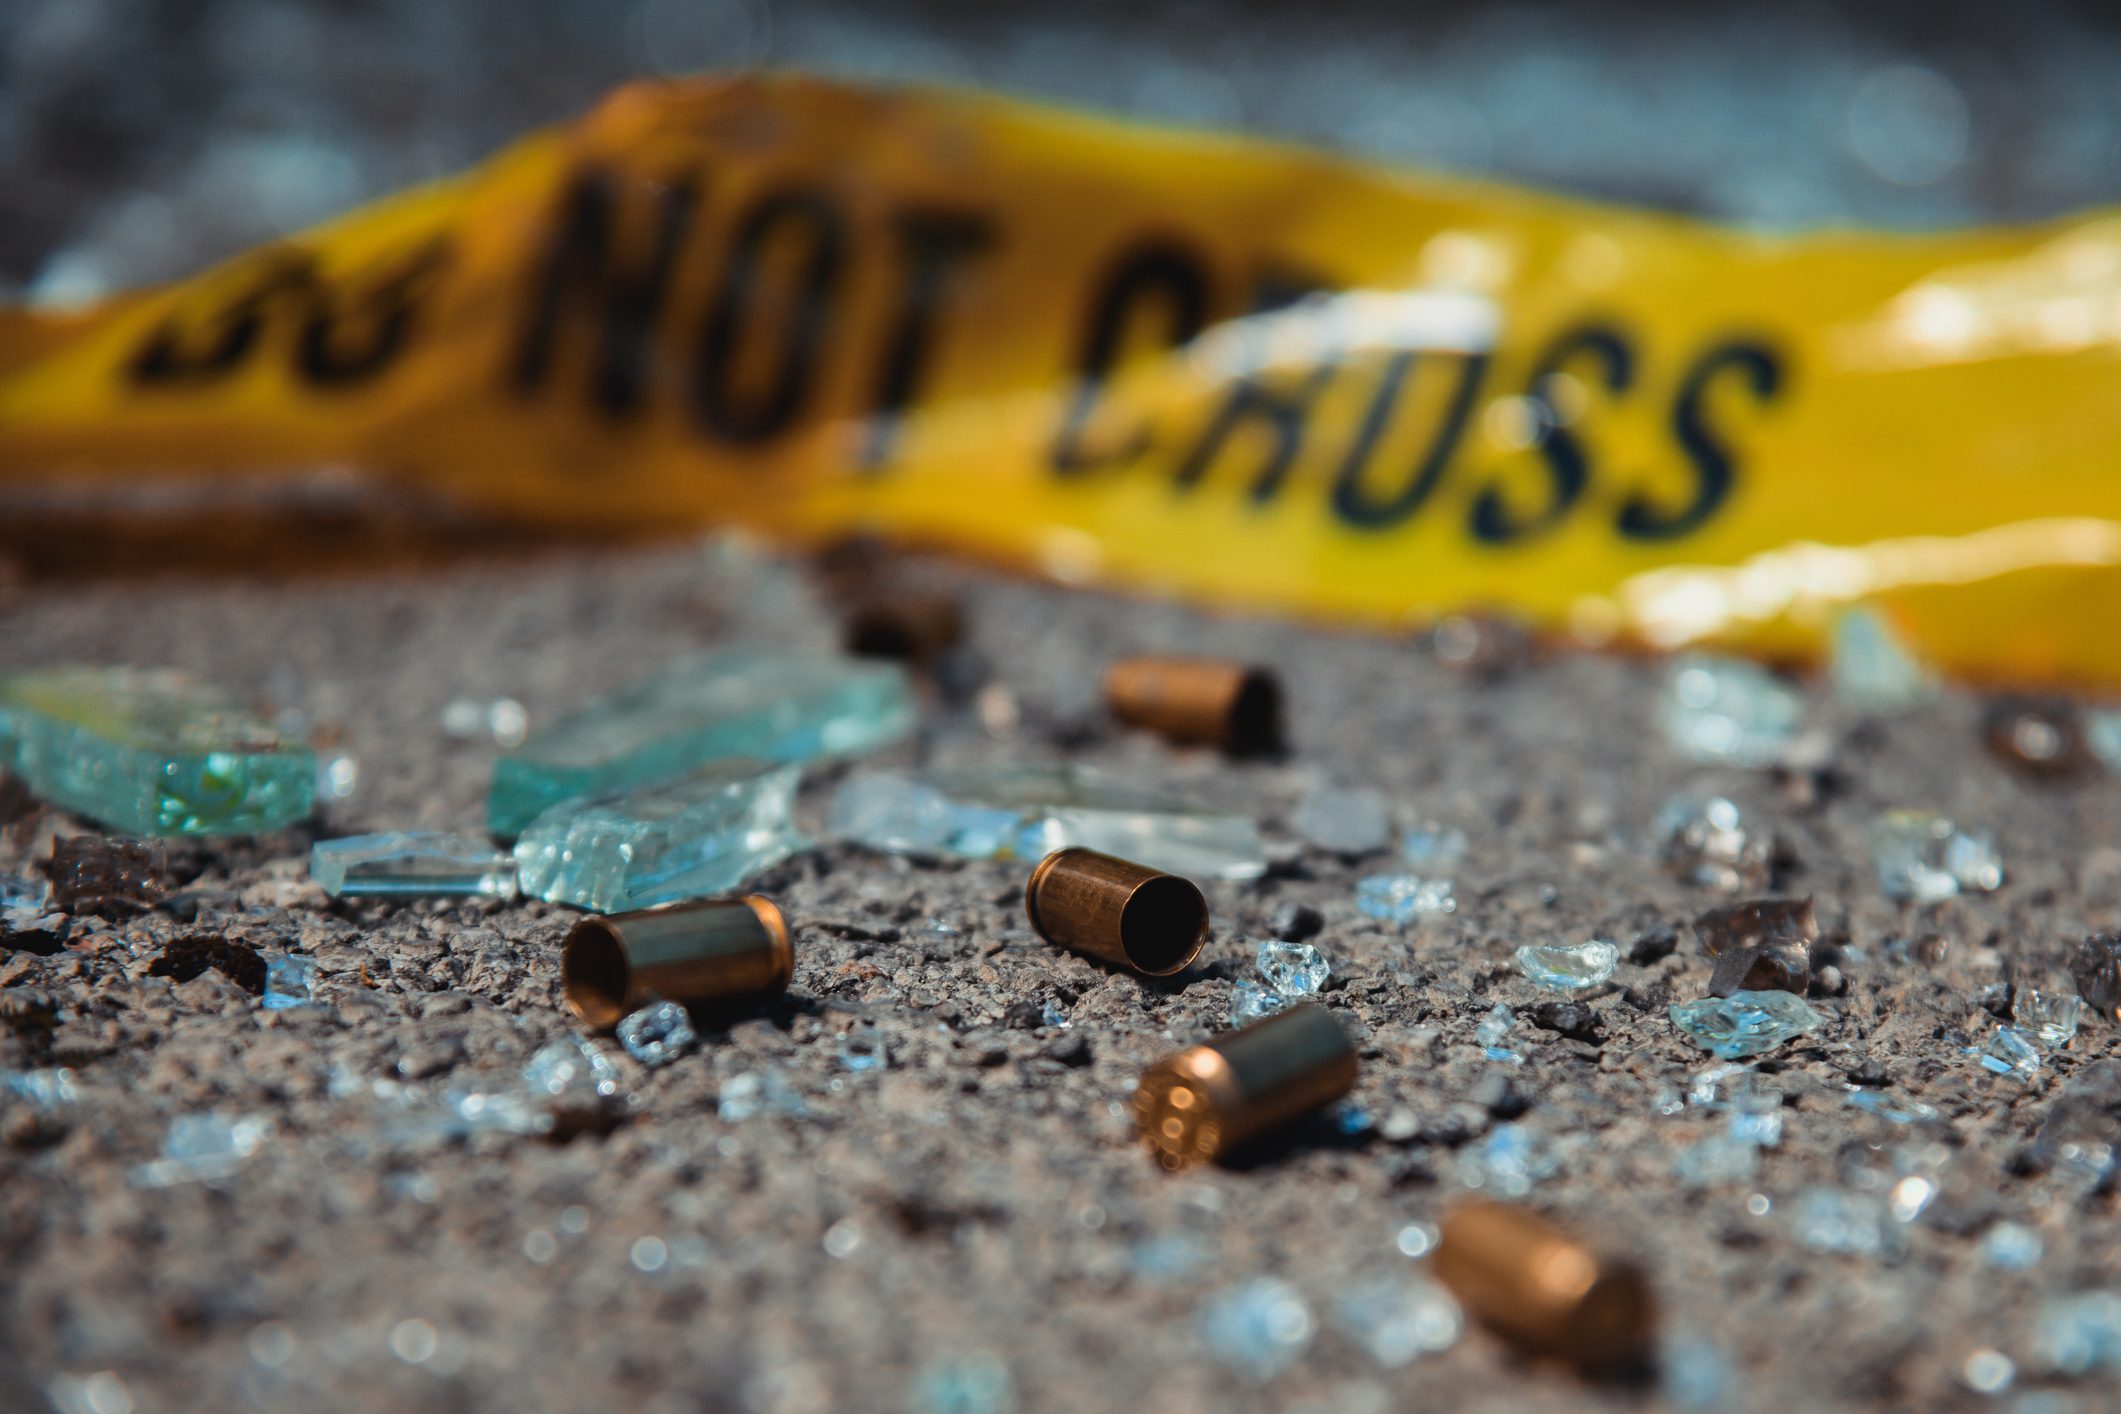 Crime scene with empty bullet shells on ground. | Image by D-Keine